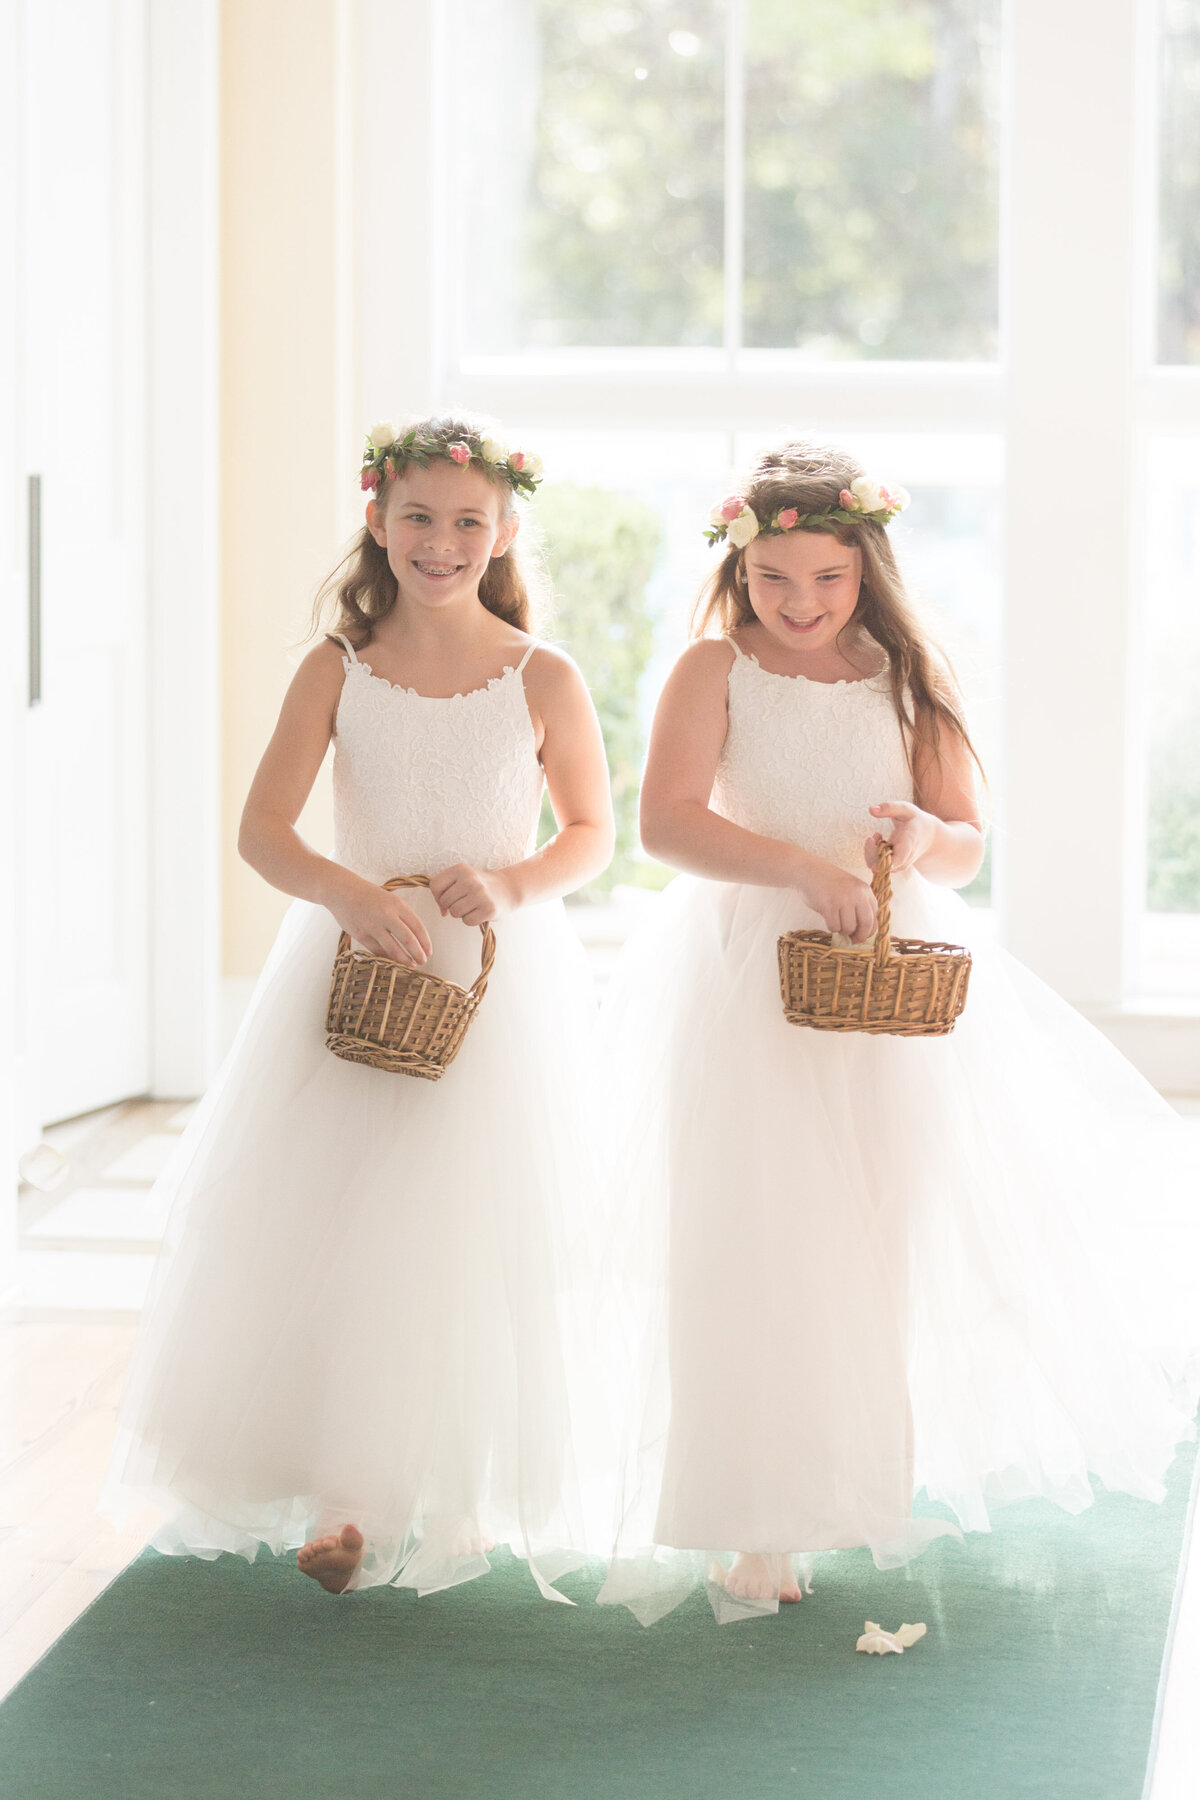 Two flower girls walk the isle as the wedding ceremony begins at St. Francis at The Point in Point Clear, Alabama.